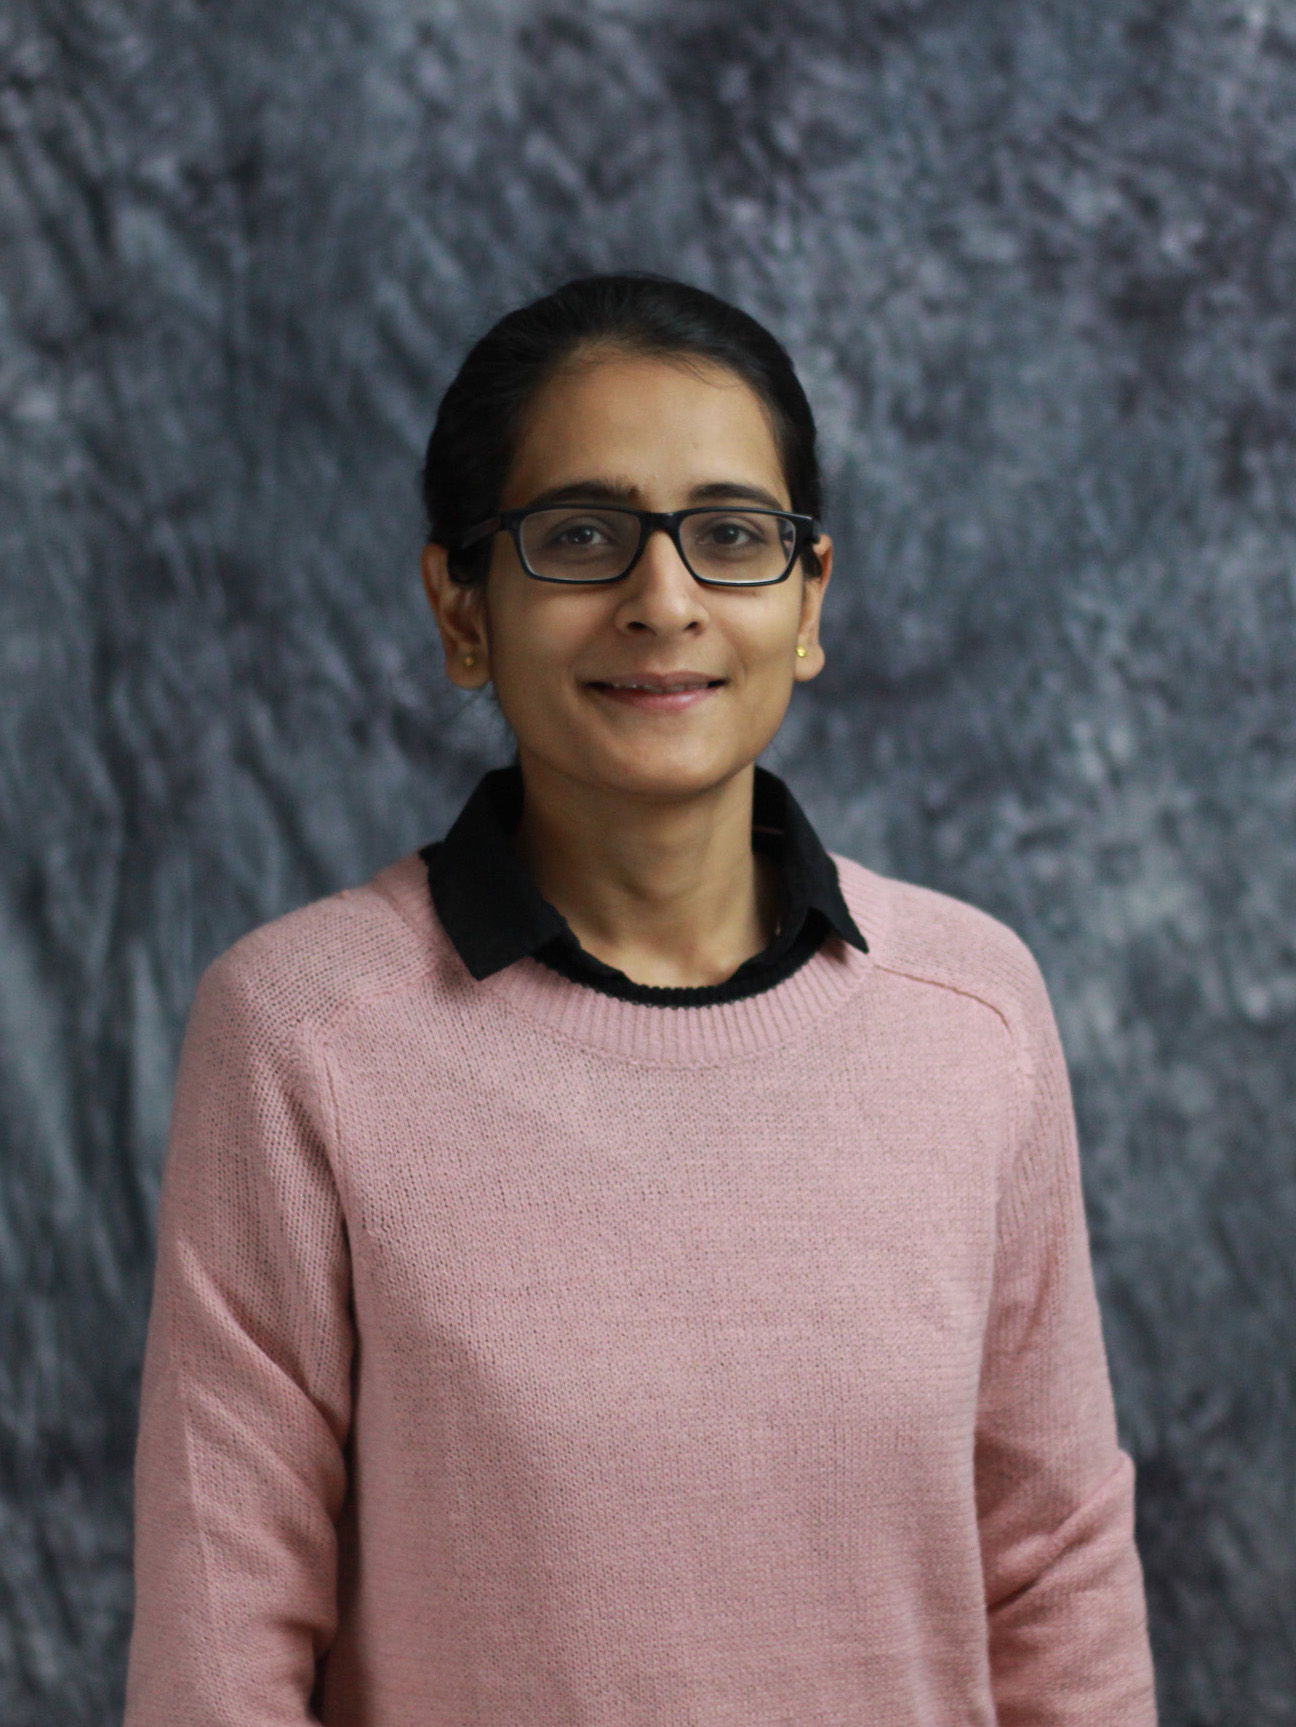 Headshot image of Mauli Pandey. She is wearing a pink sweater over a black shirt and standing in front of a grey background. She is smiling in the photo.